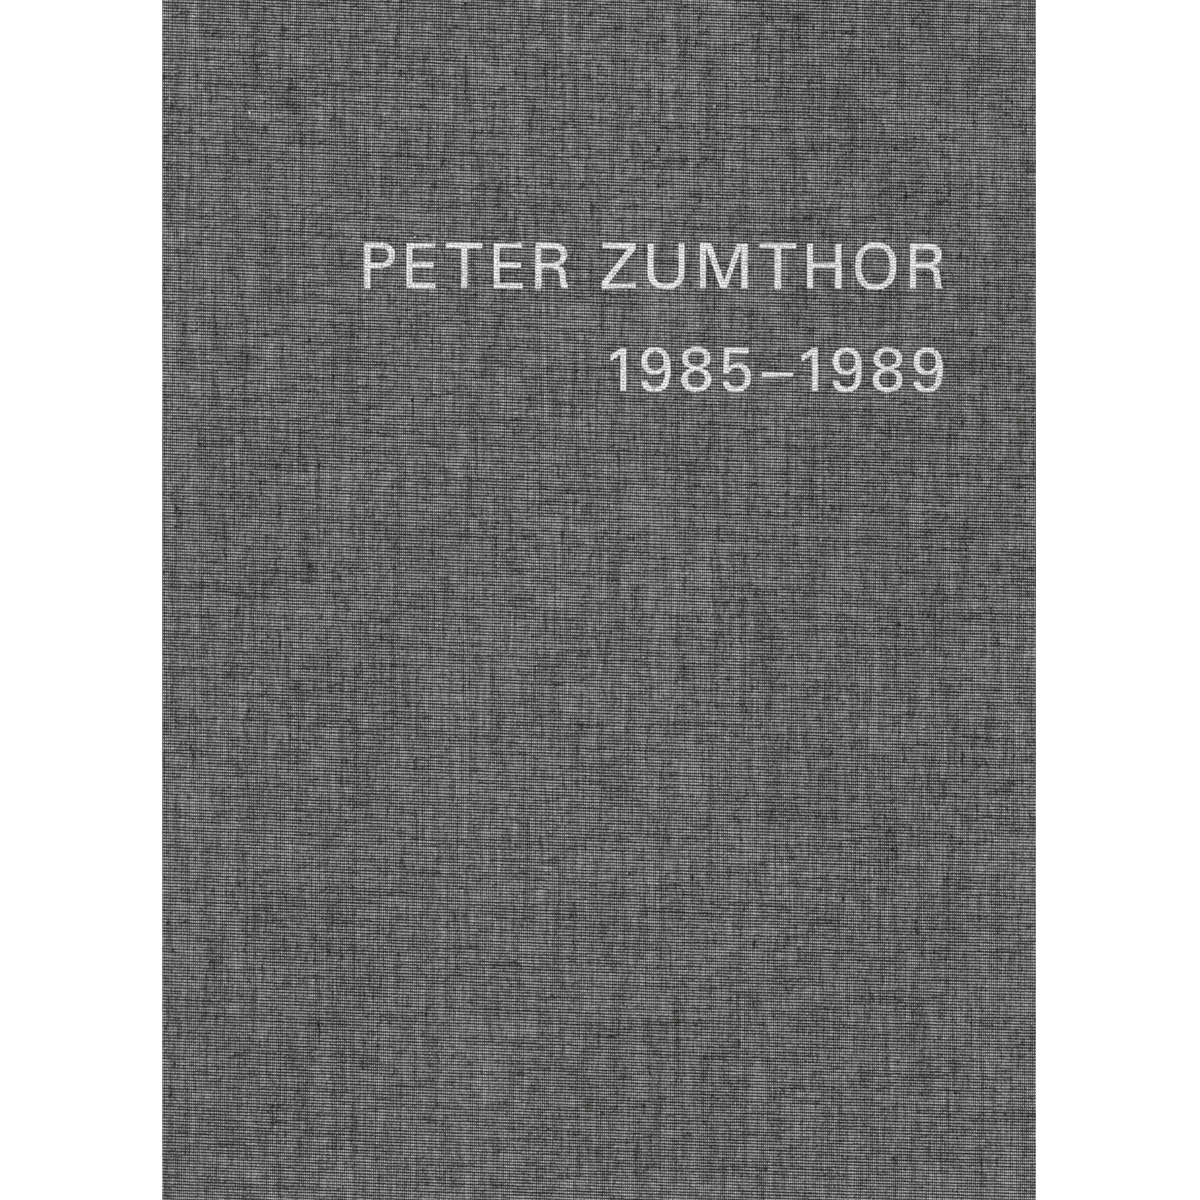 Peter Zumthor. Buildings and Projects, 1985-2013 - Thomas Durisch 